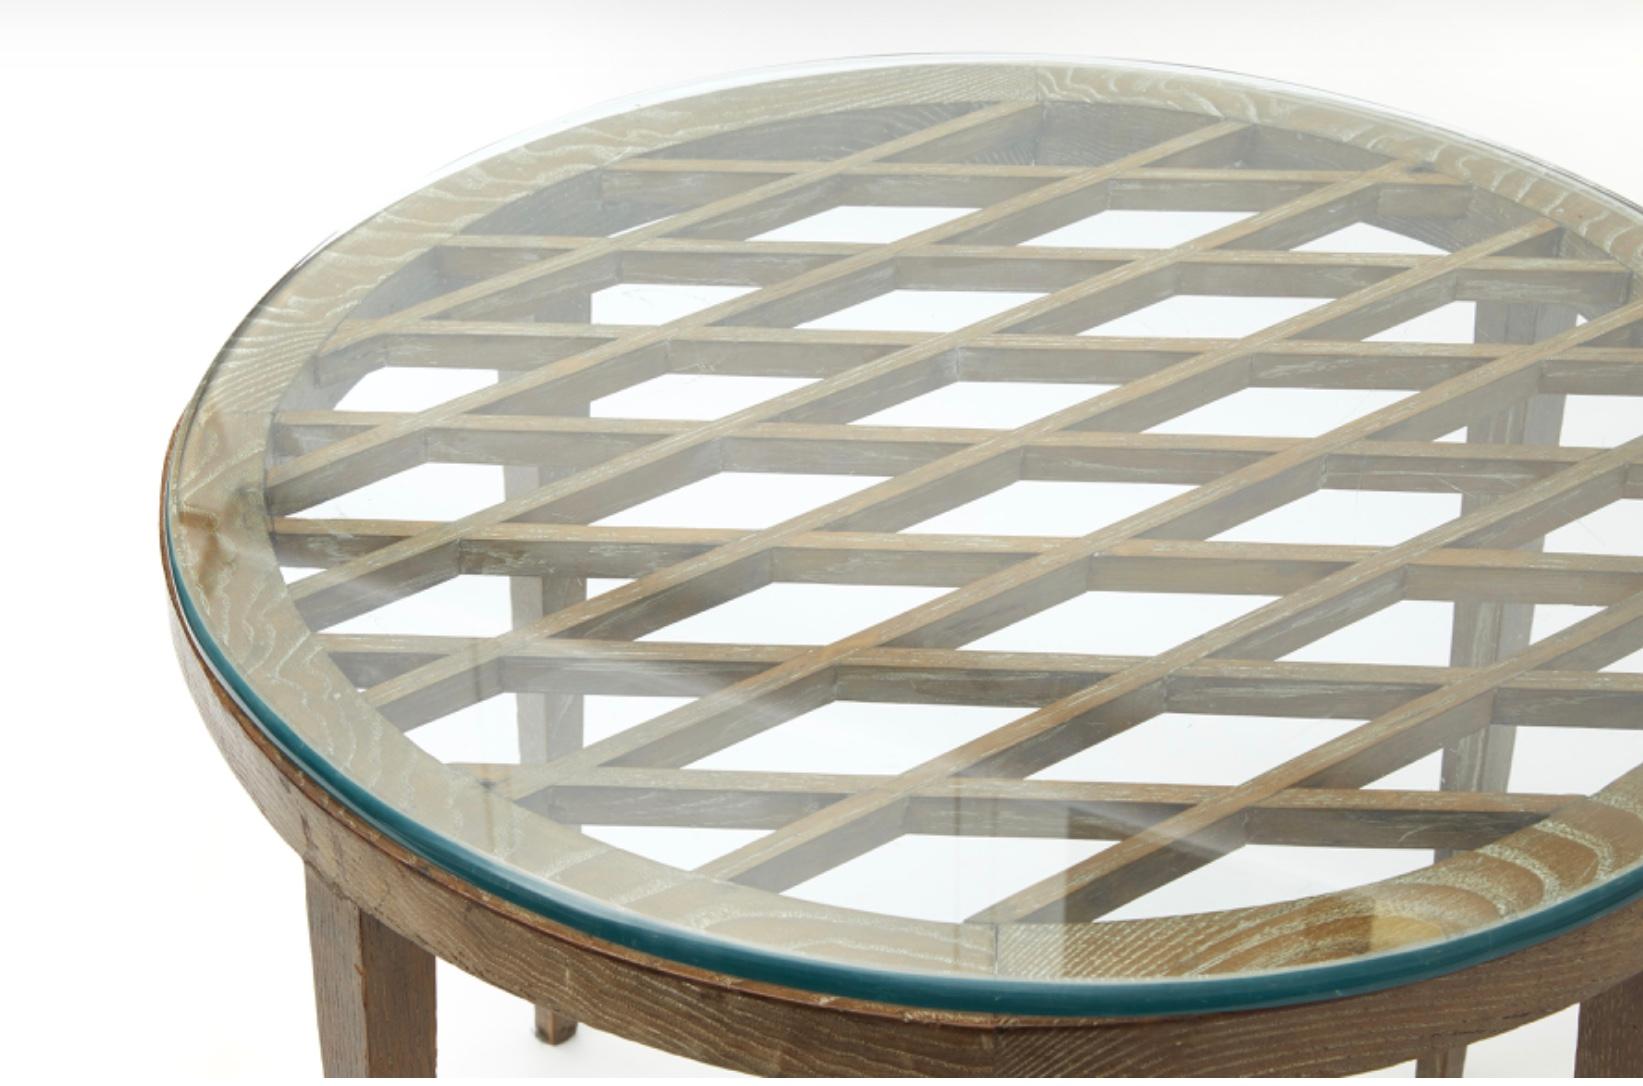 Other Gio‘ Ponti “stile” Table Wood Glass, 1940, Italy